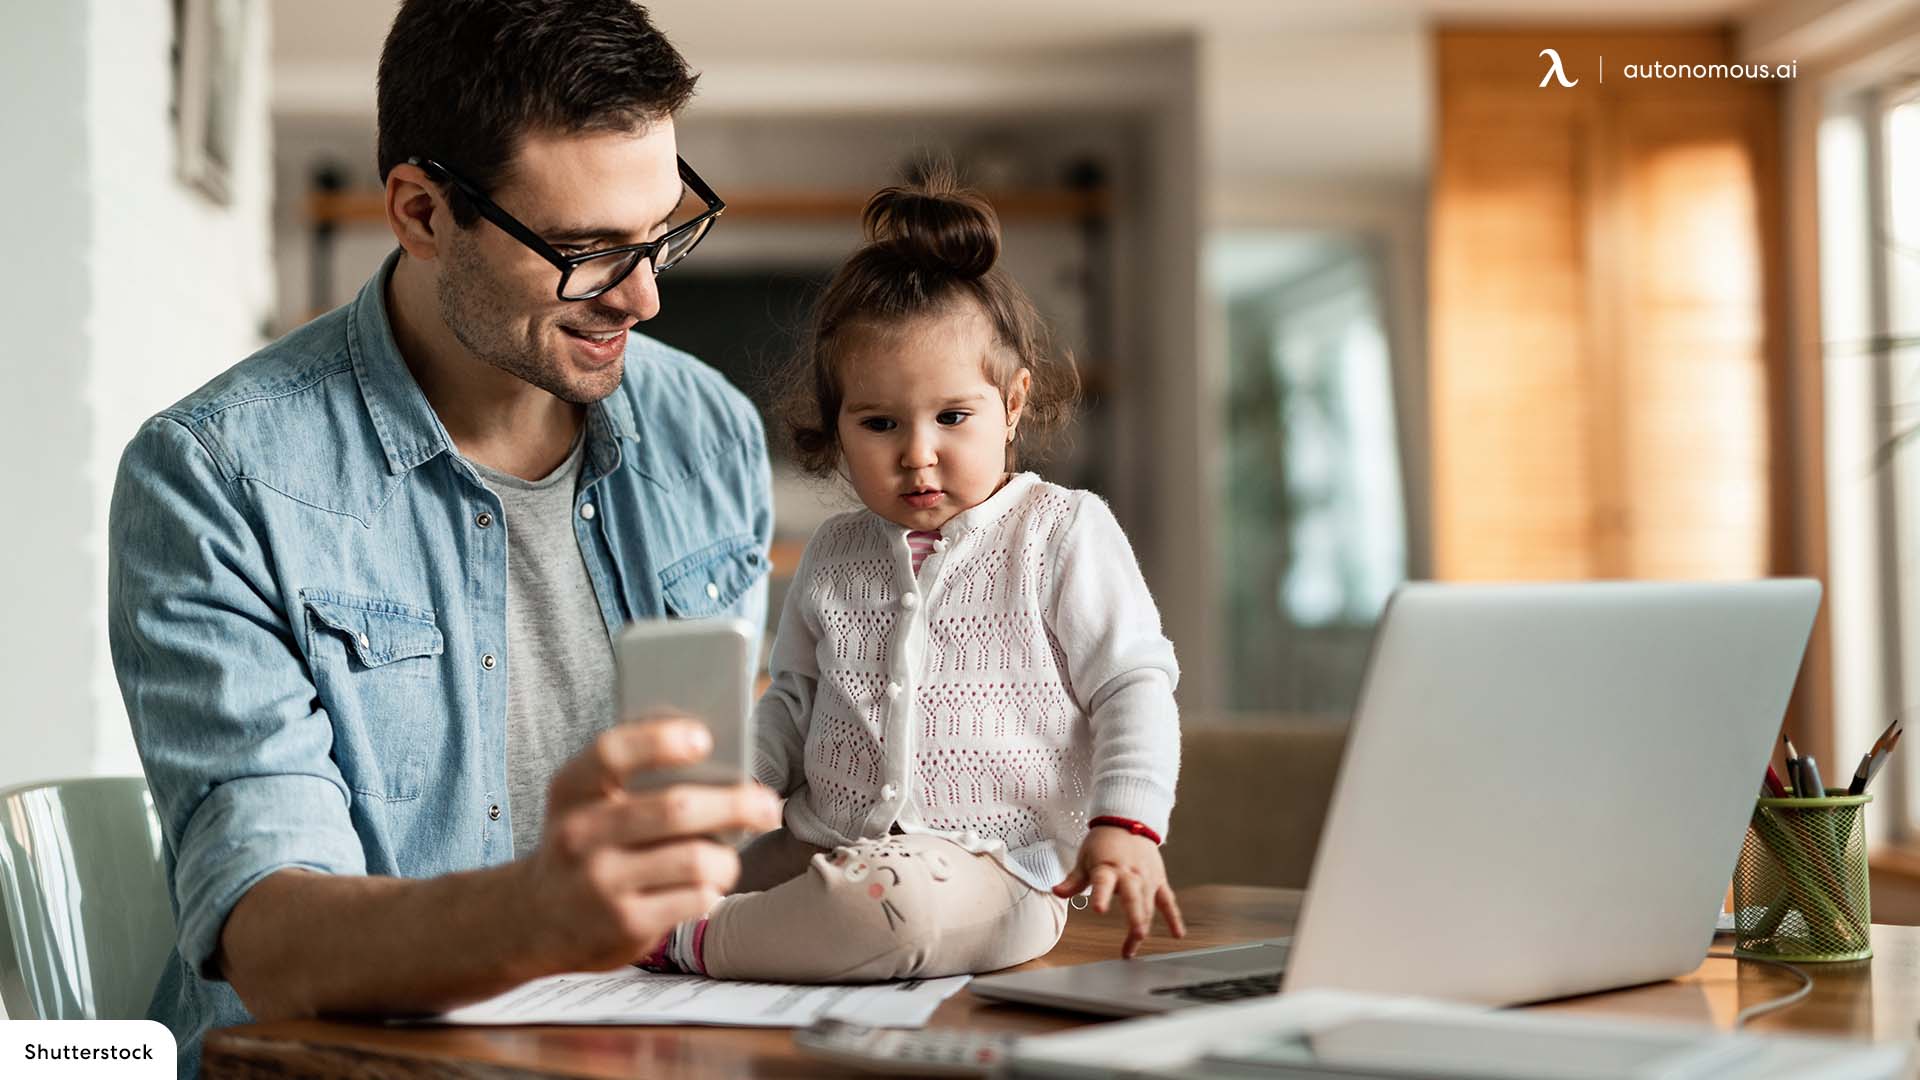 10 Ways that Company can Support Parents Working from Home